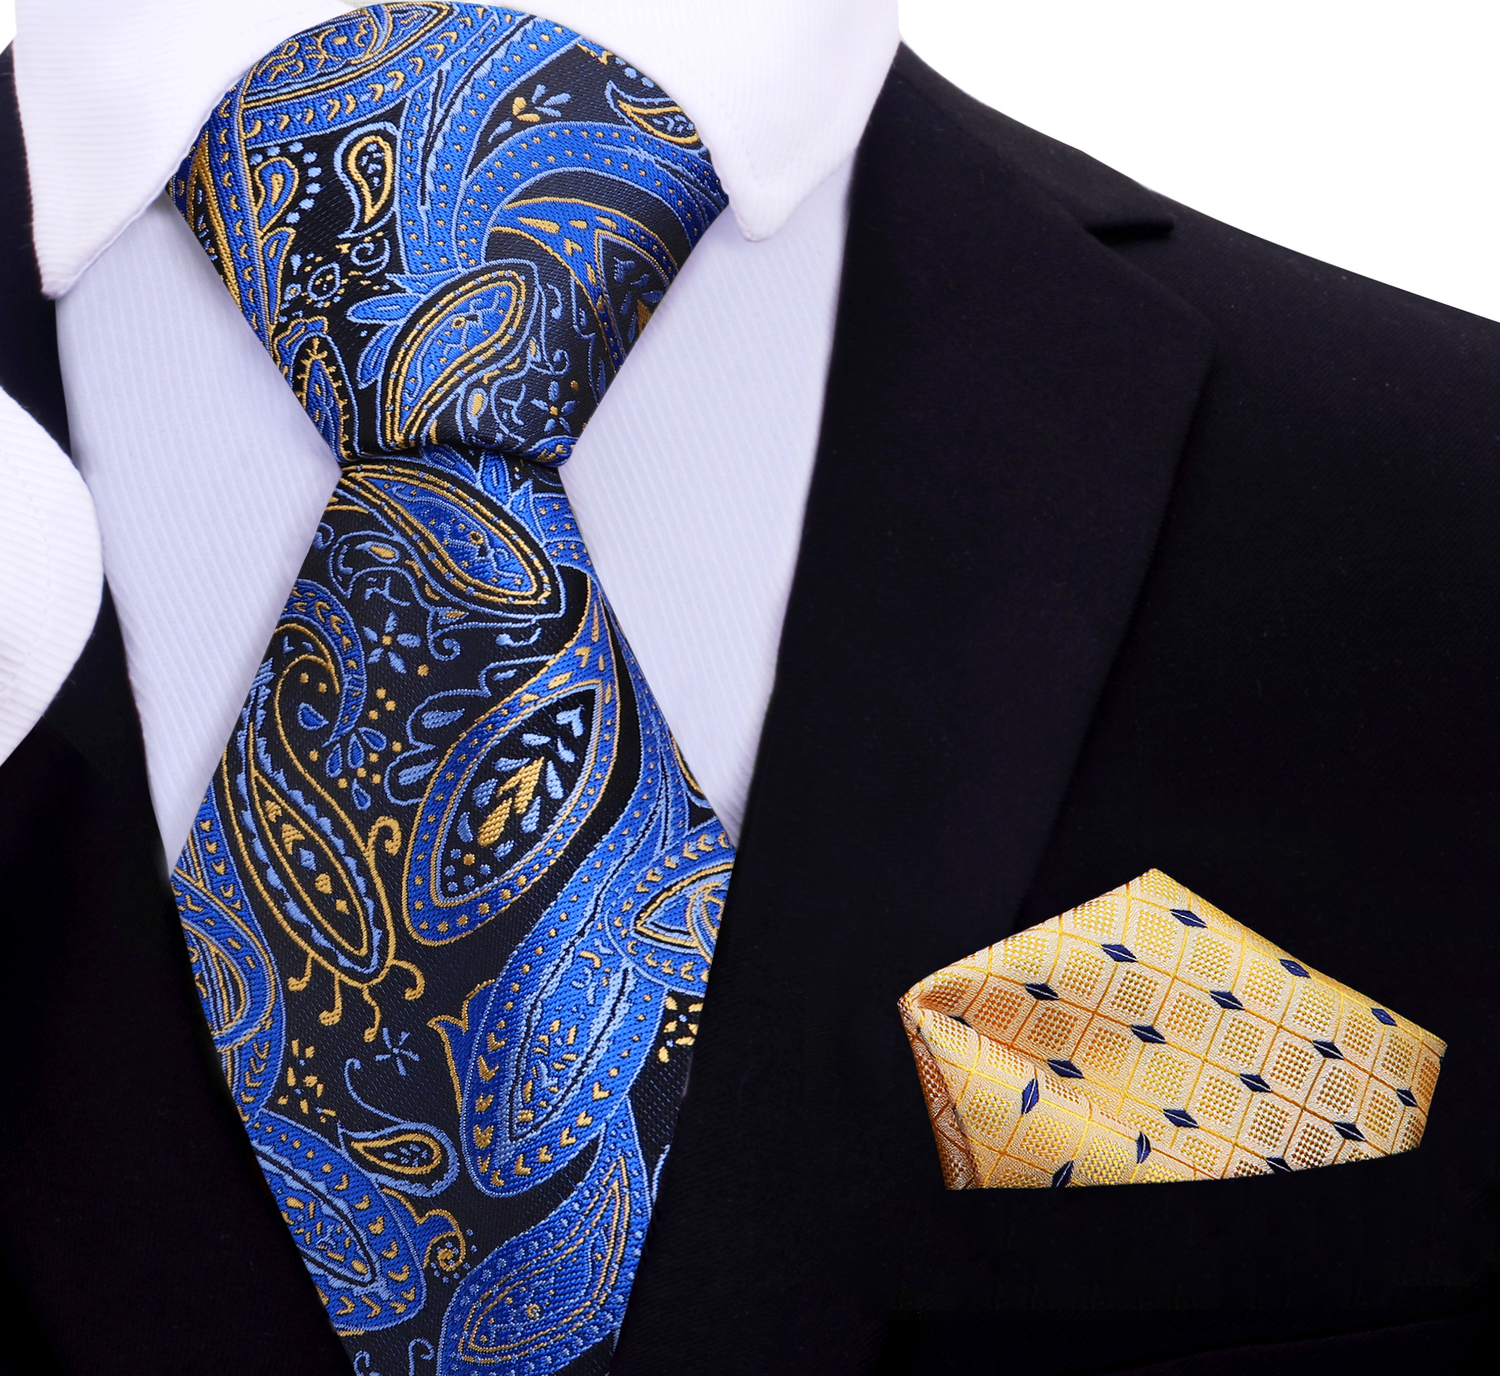 Black, Blue, Yellow Paisley Tie and Accenting Yellow Pocket Square